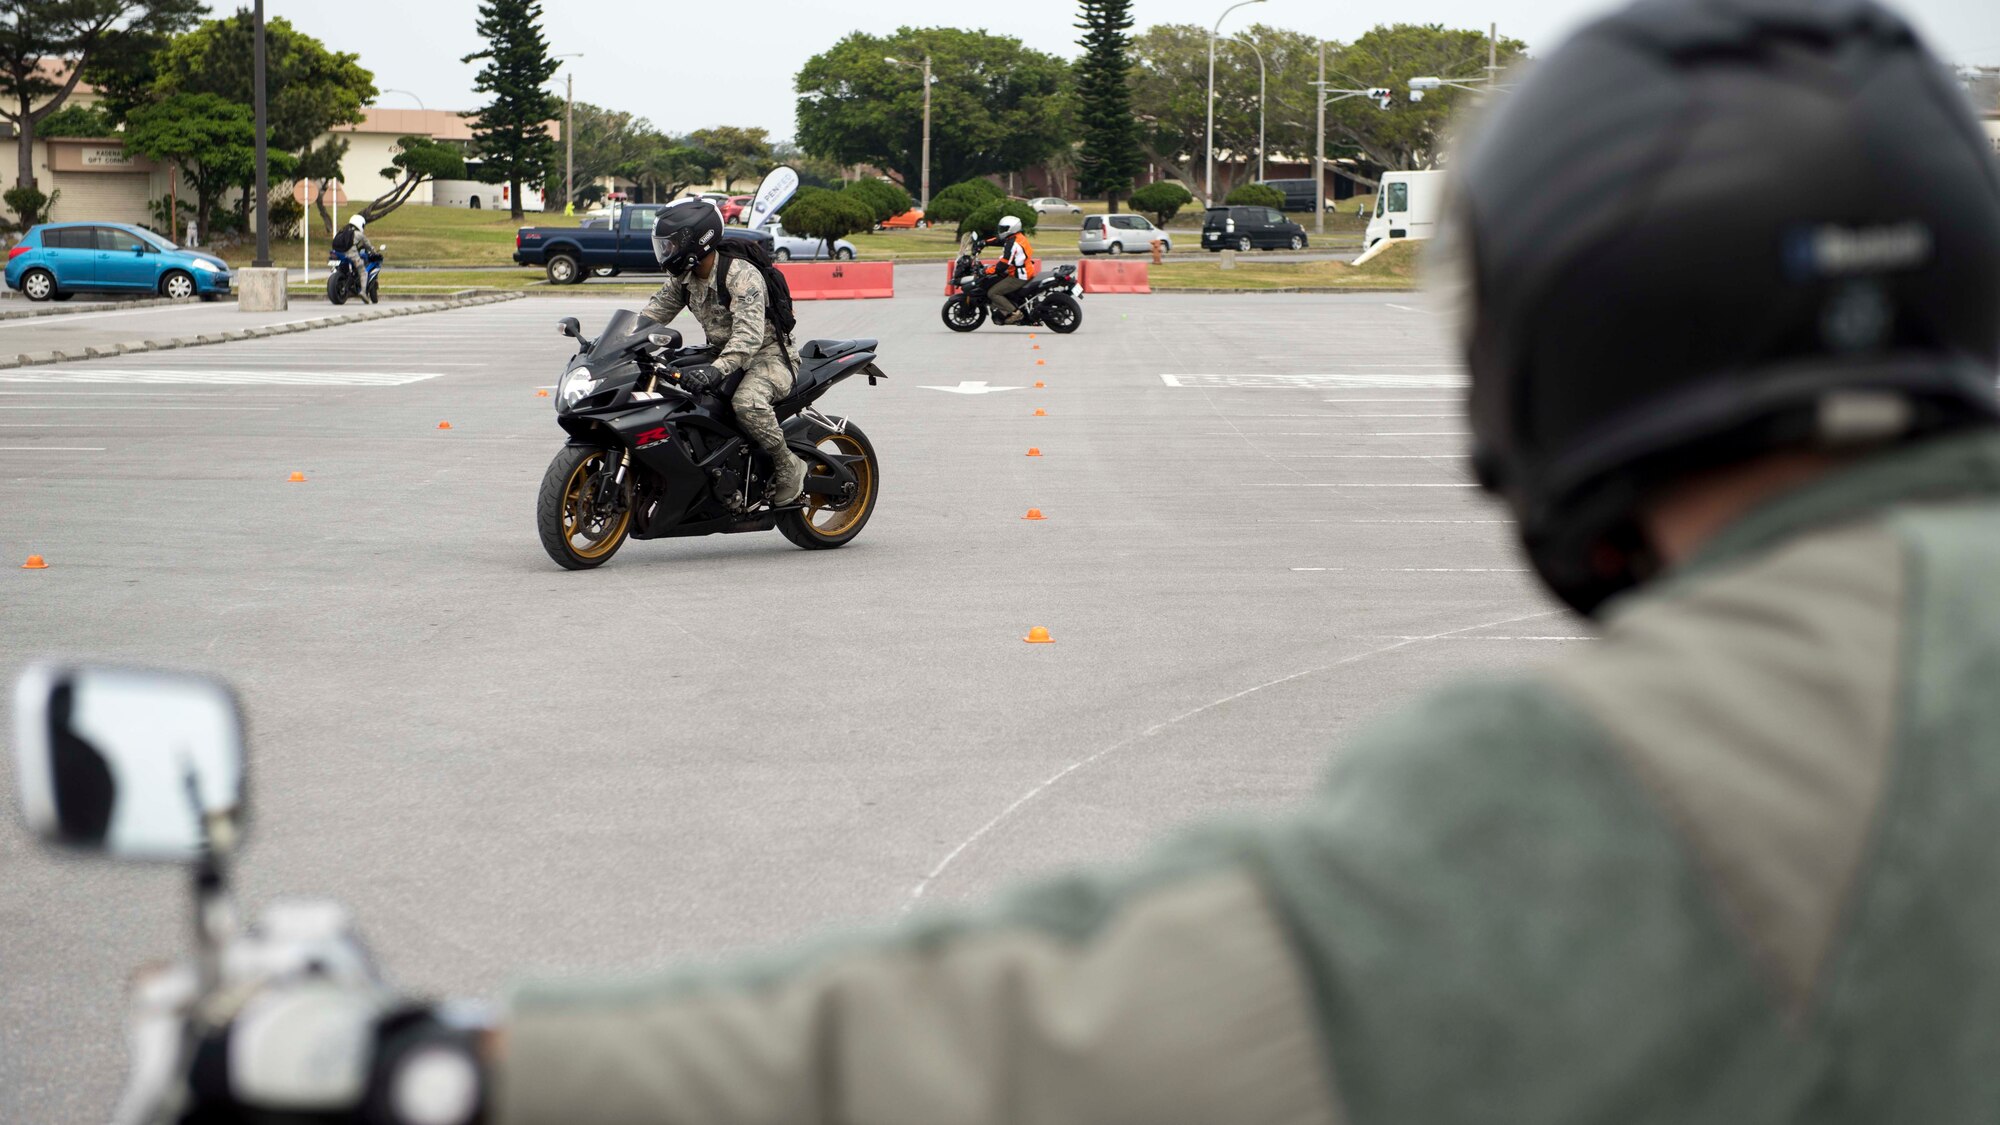 Motorcycle riders refresh their skills on a handling course during an 18th Wing annual motorcycle safety brief March 9, 2017, at Kadena Air Base, Japan. Wing Safety and the Green Knights chapter 138 hosted the event to reinforce safety regulations and help riders test their bike handling skills. (U.S. Air Force photo by Staff Sgt. Peter Reft/Released)